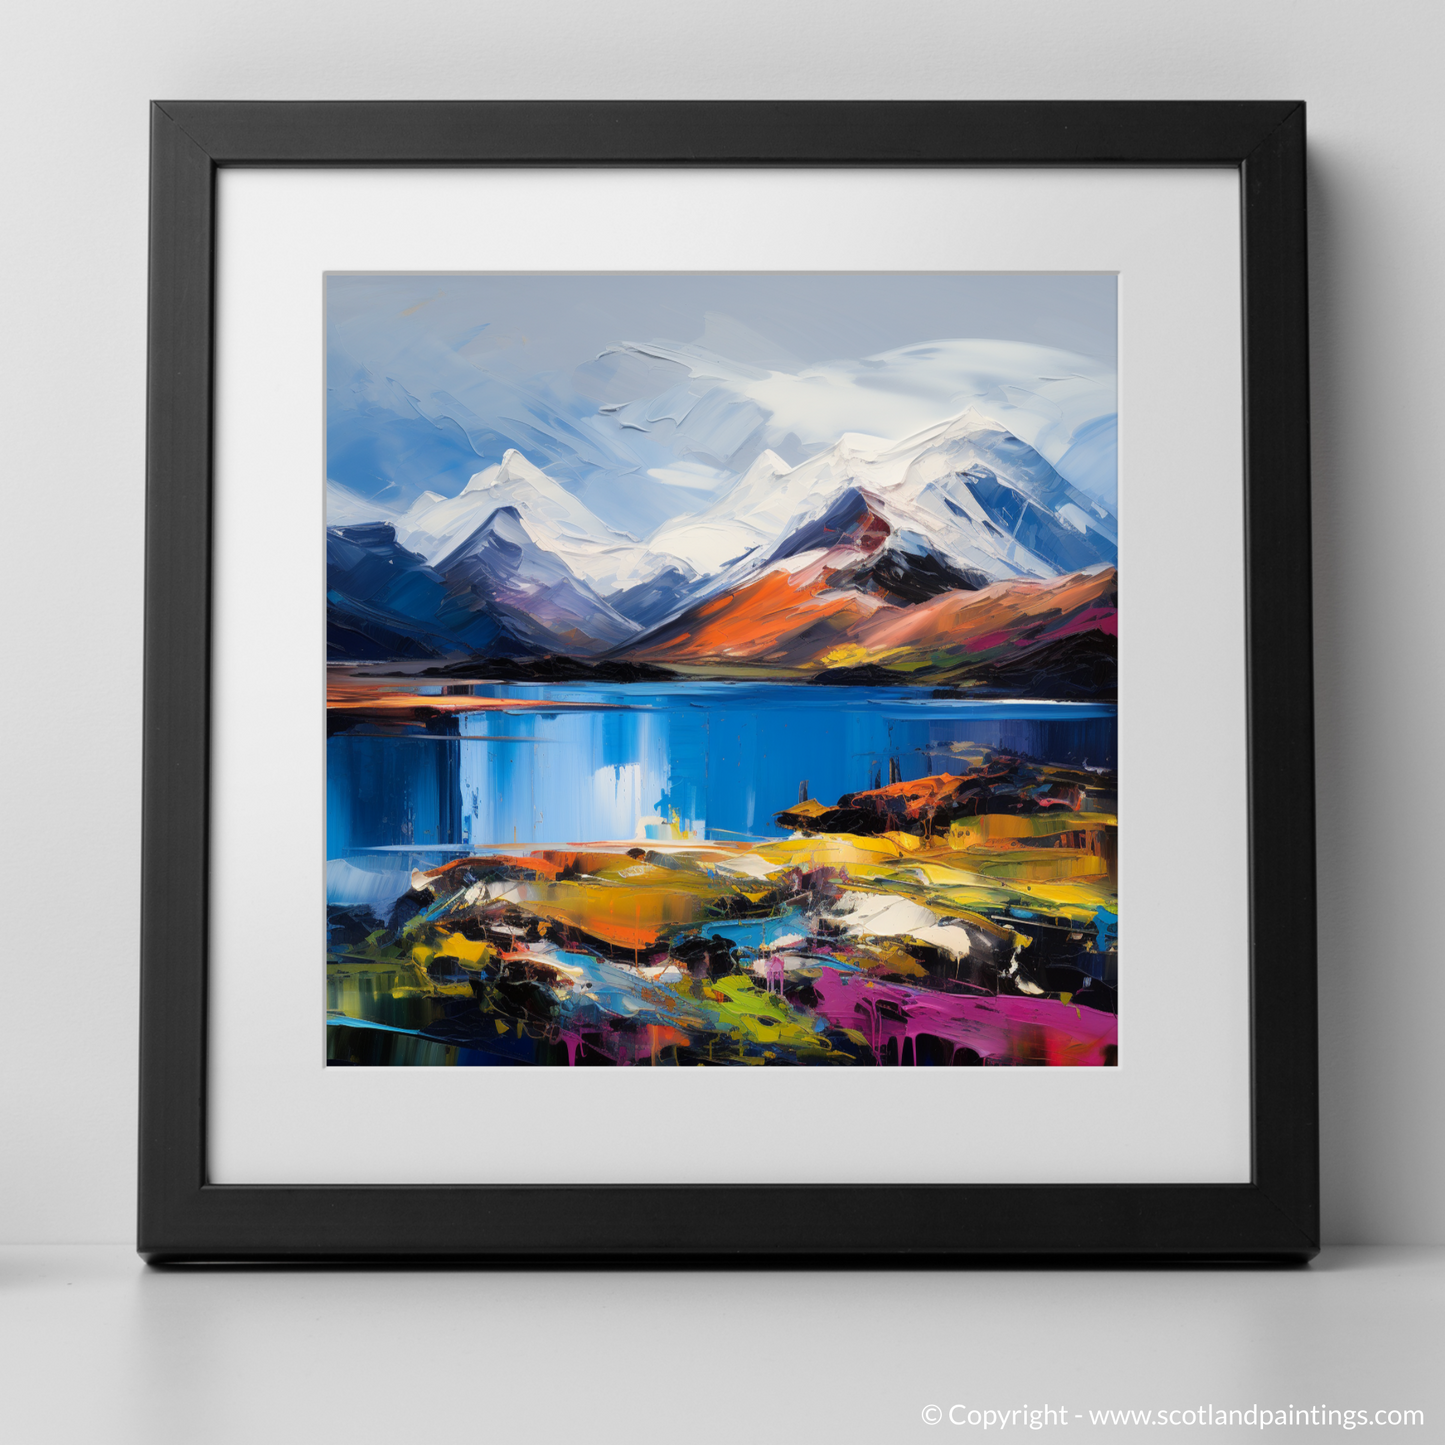 Art Print of Snow-capped peaks overlooking Loch Lomond with a black frame